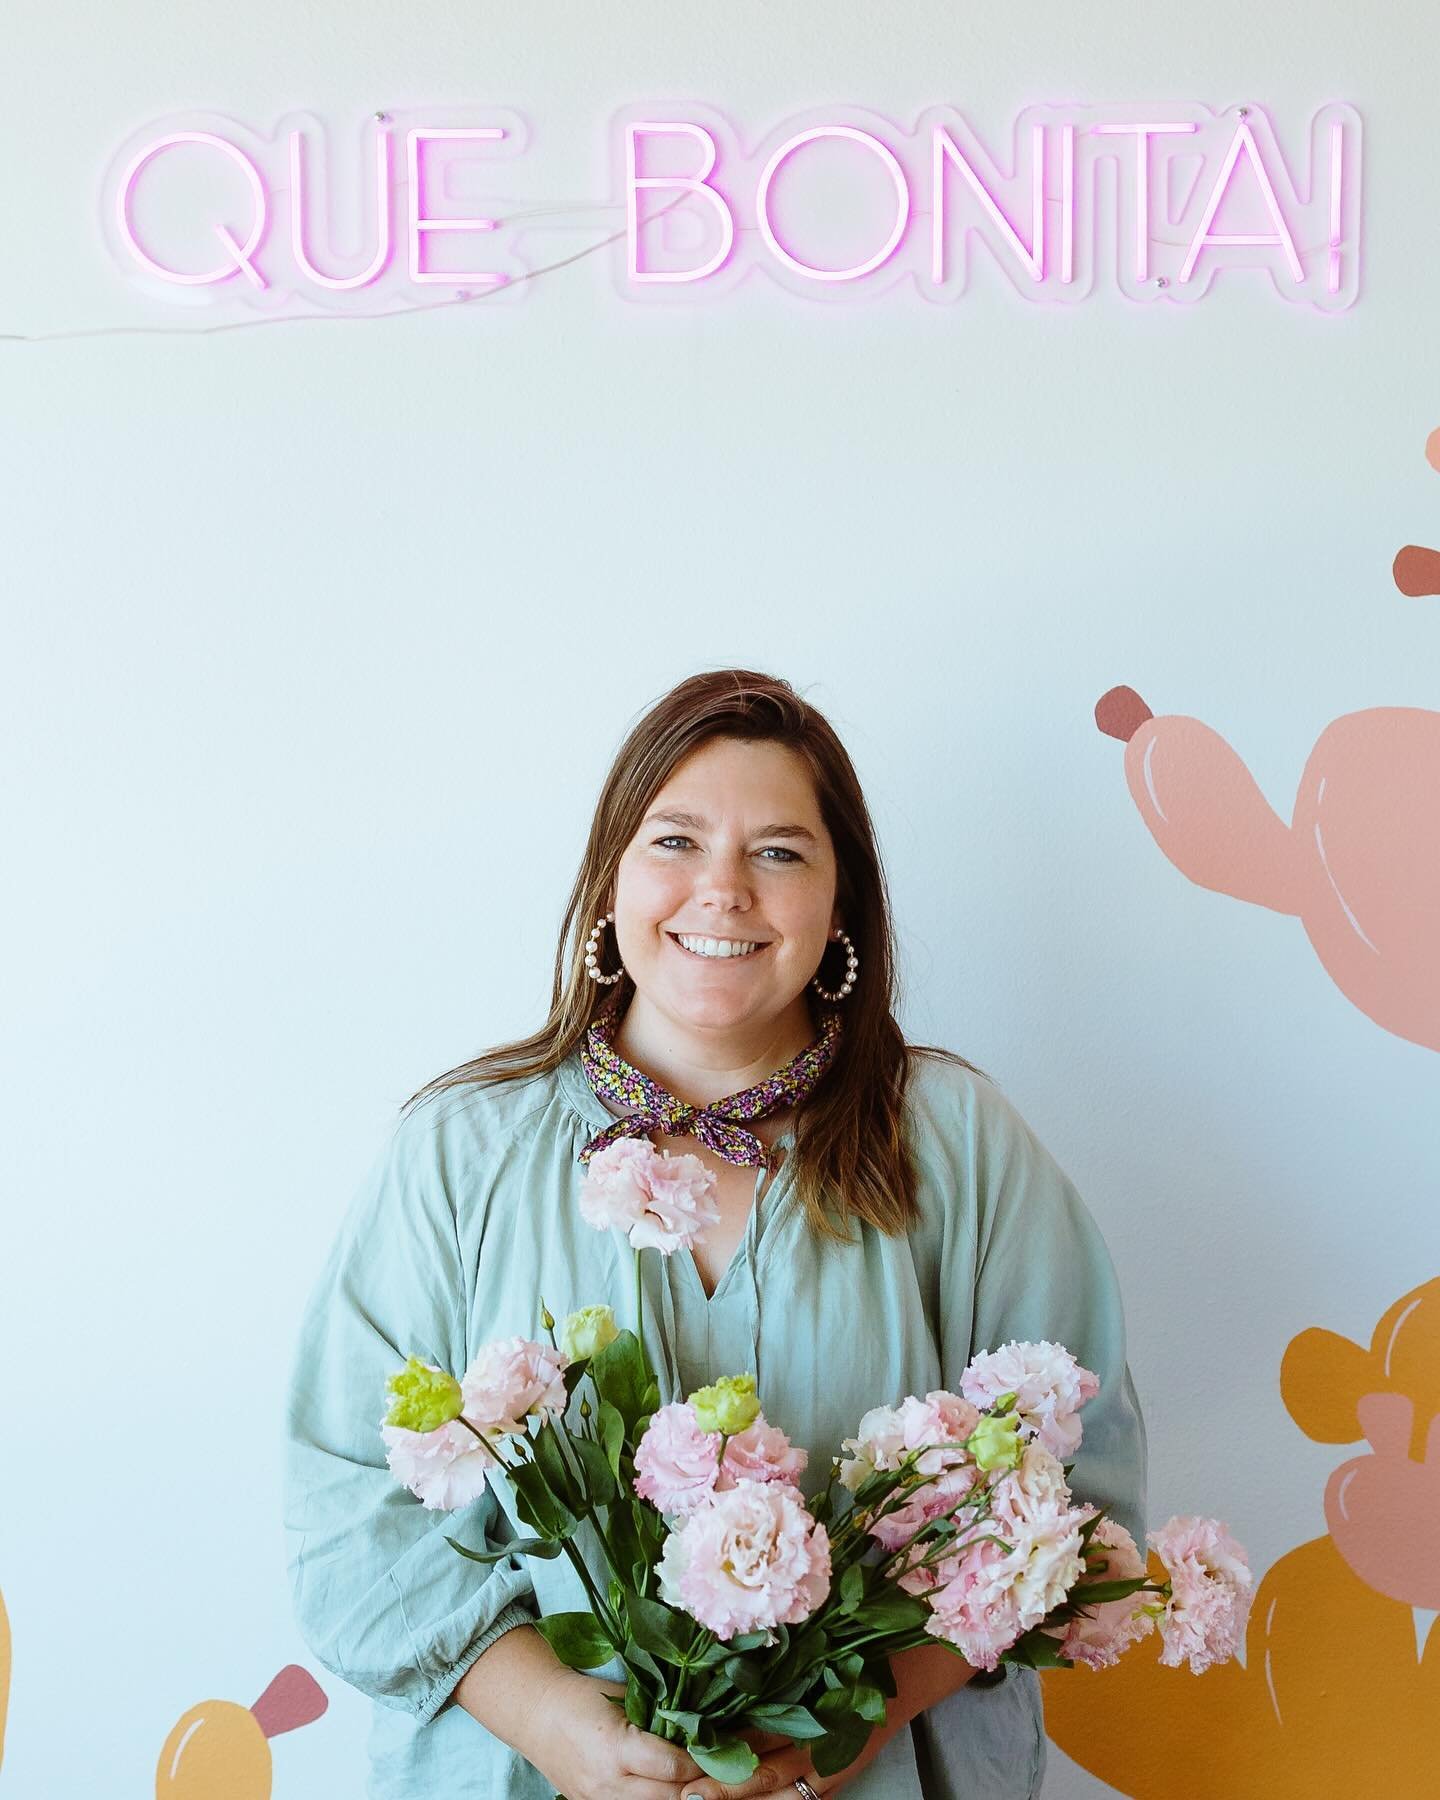 🌸✨ It&rsquo;s with a whirlwind of emotions that we announce the closing of Florecita&rsquo;s beloved retail space. Three years filled with unforgettable memories, dreams realized, and a whole lot of flower power! 🌼💕

From our humble beginnings ami